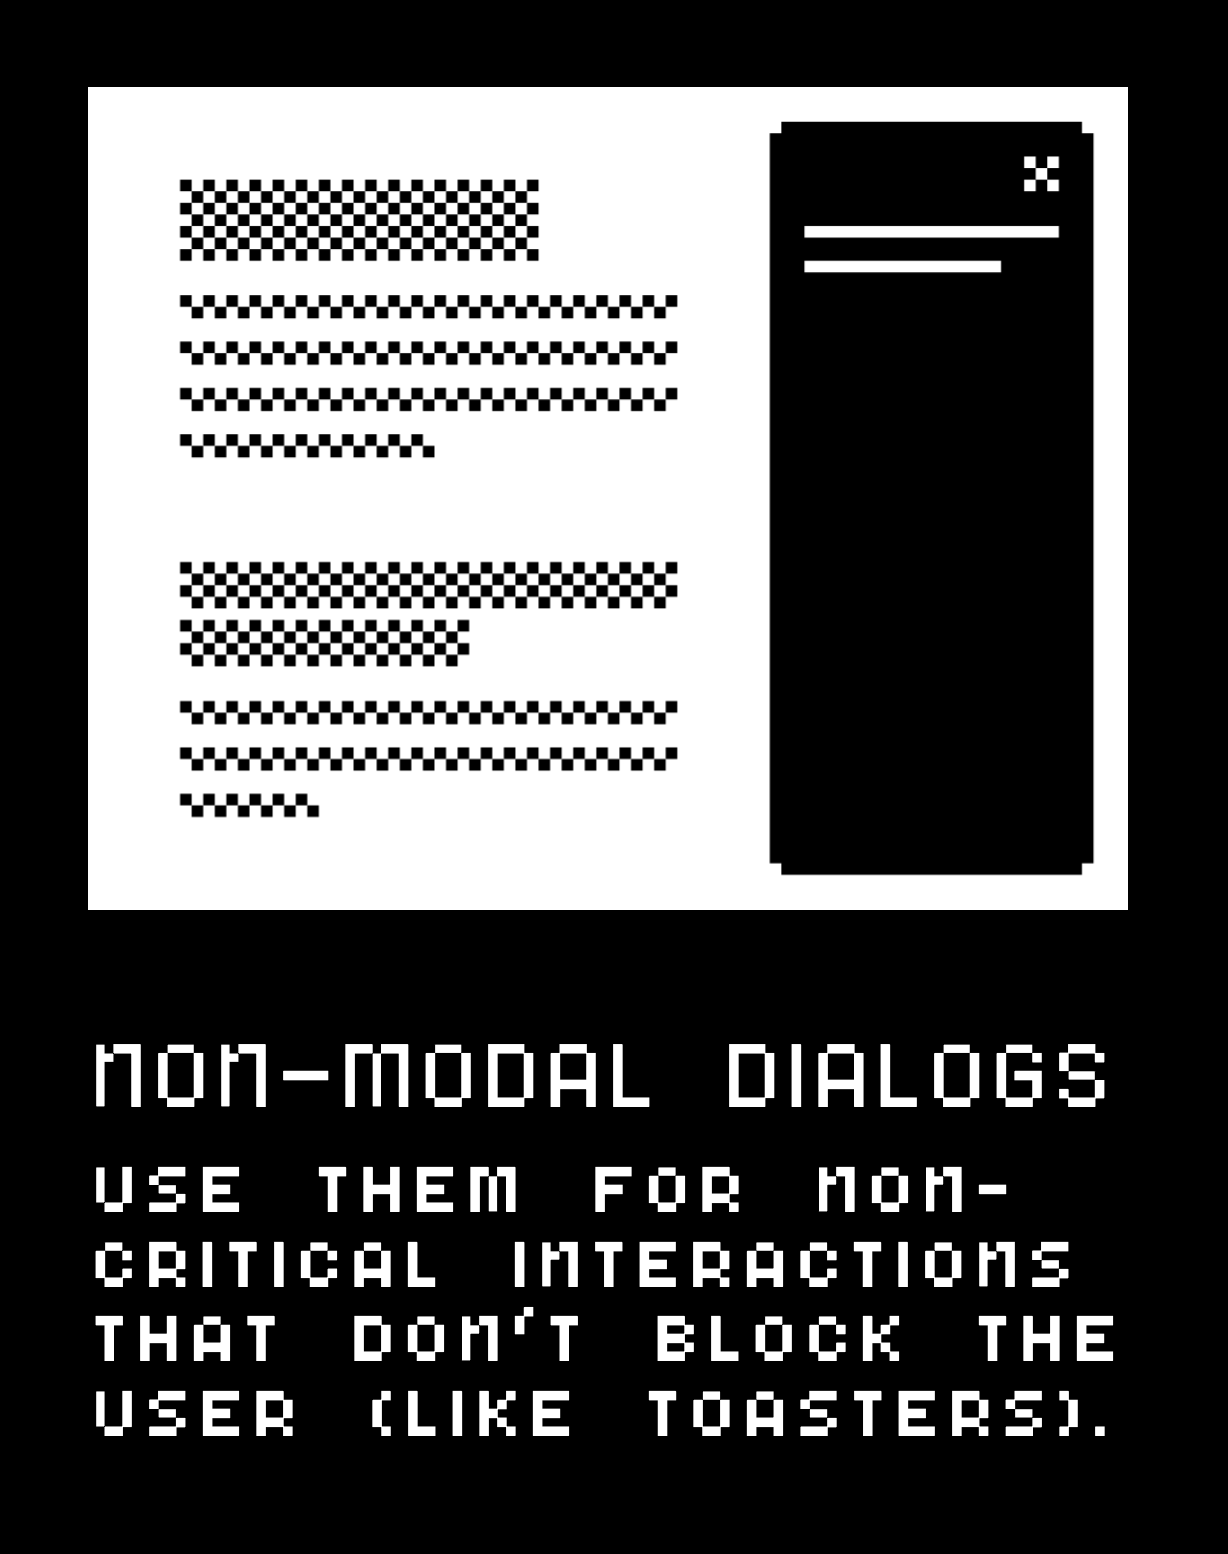 Non-modal dialogs: use them for non-critical interactions that don't block the user (like toasters).